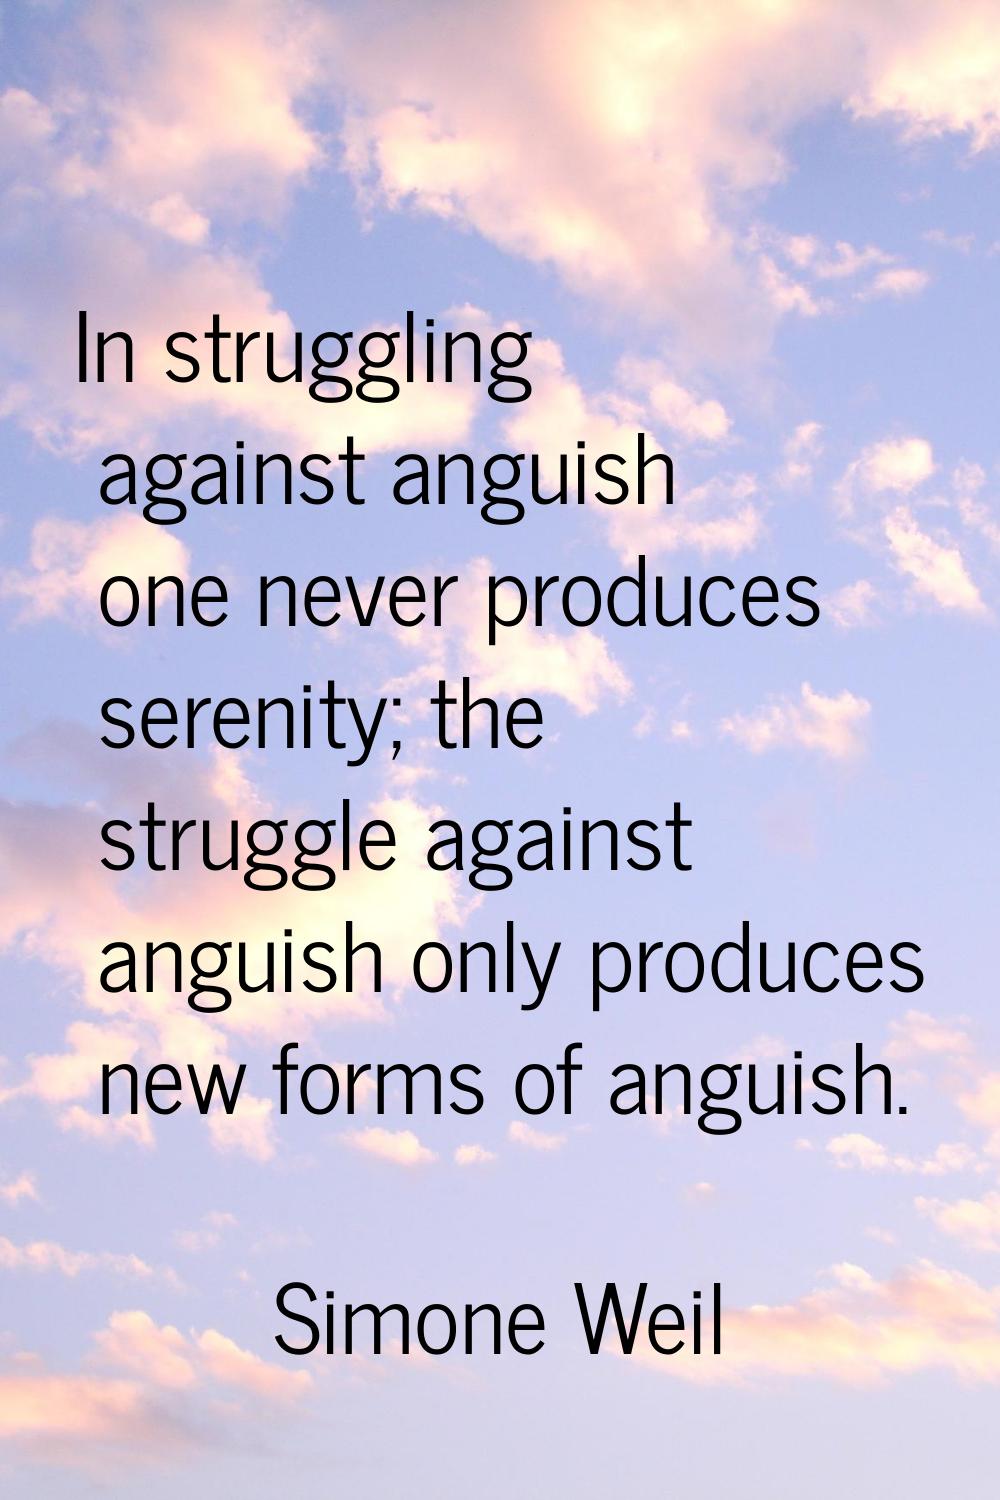 In struggling against anguish one never produces serenity; the struggle against anguish only produc